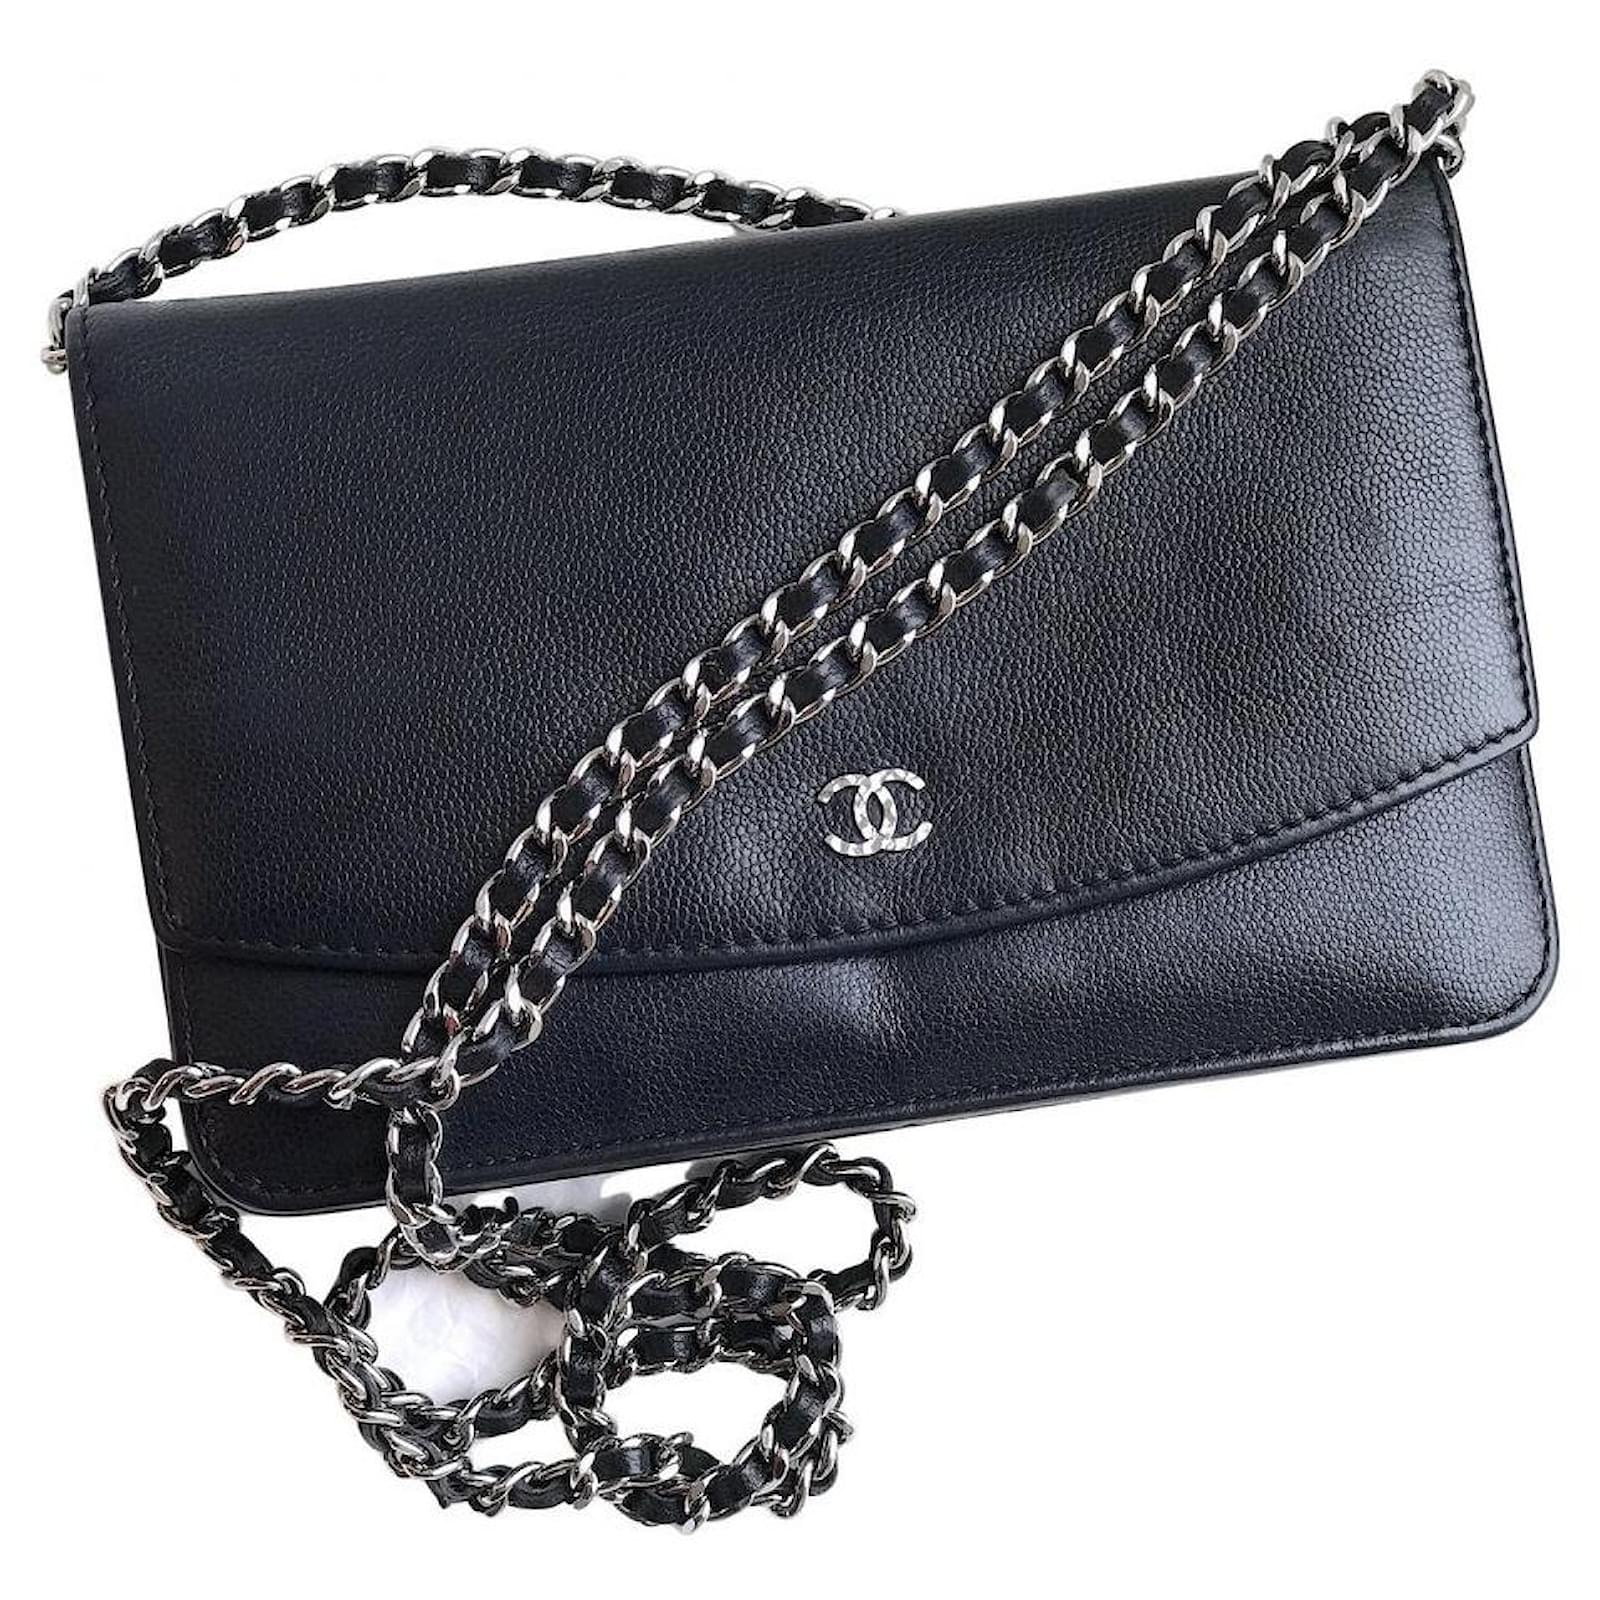 Chanel Caviar Leather Wallet On A Chain Blue with Silver Hardware